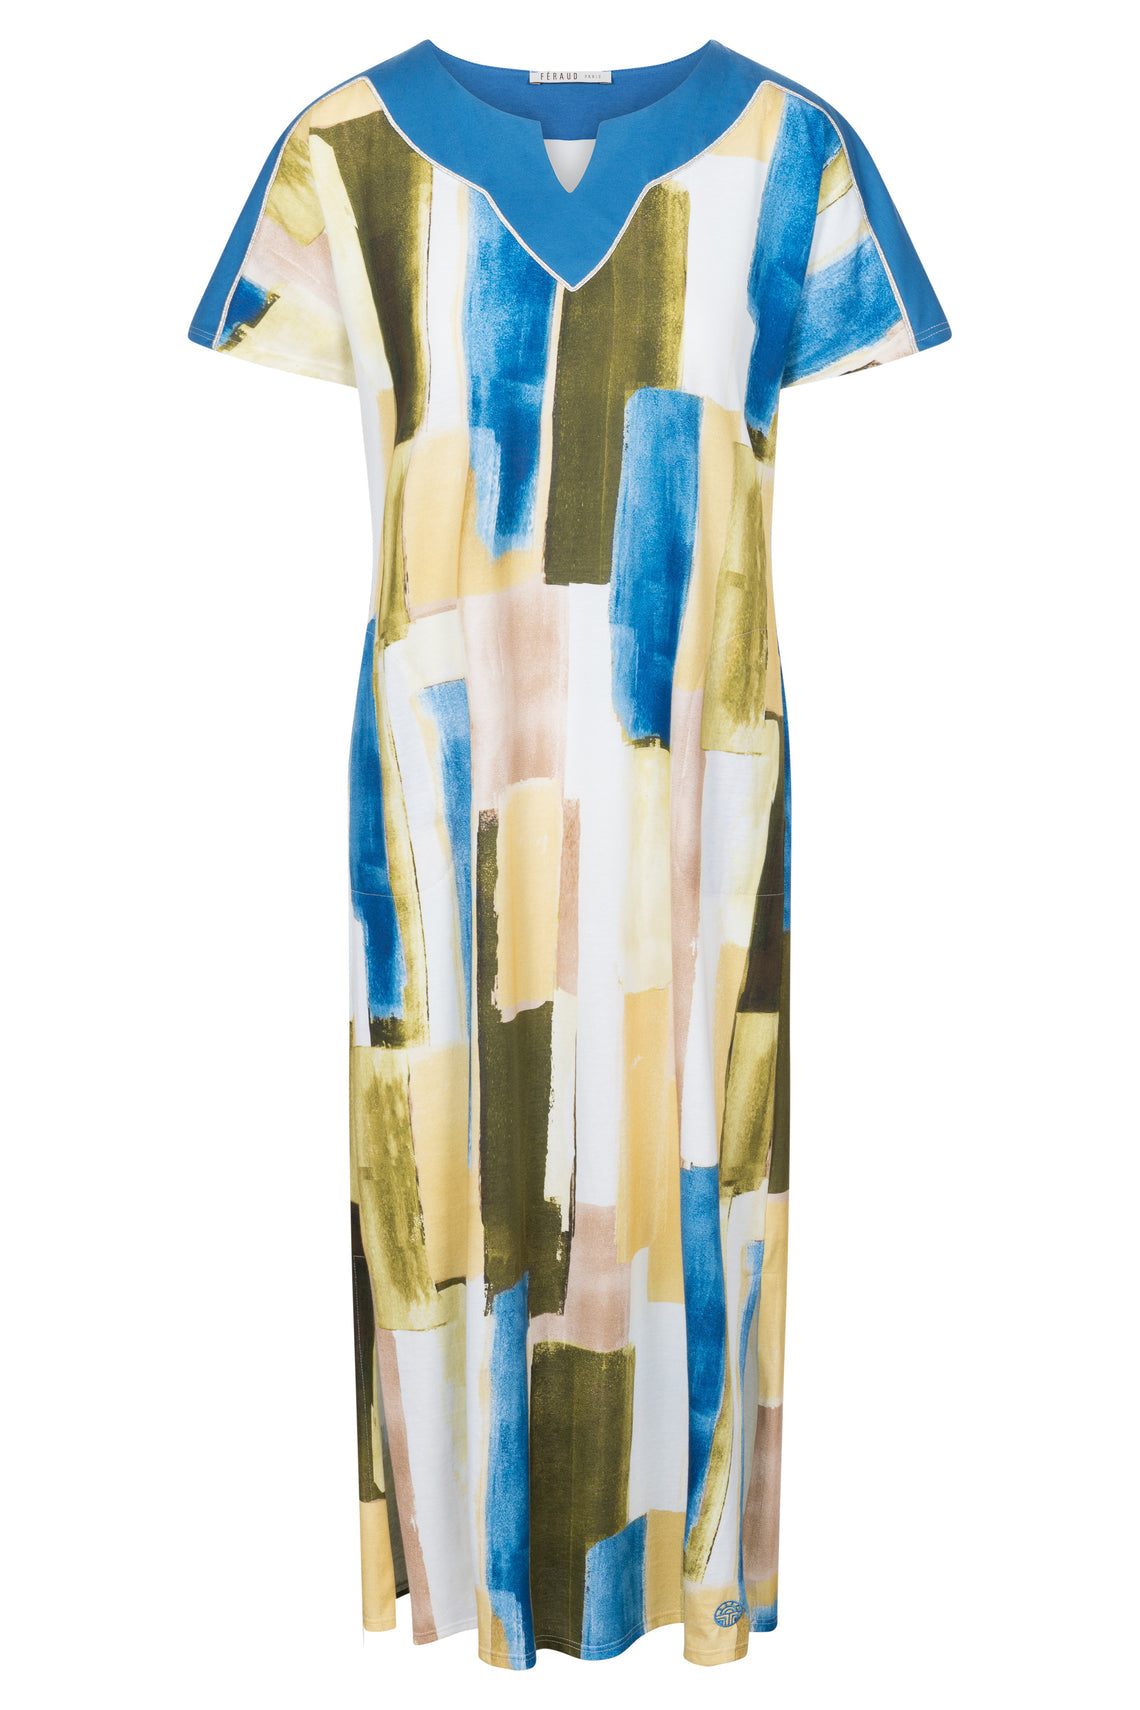 Feraud Graphic Print Pocketed Nightgown Lounger